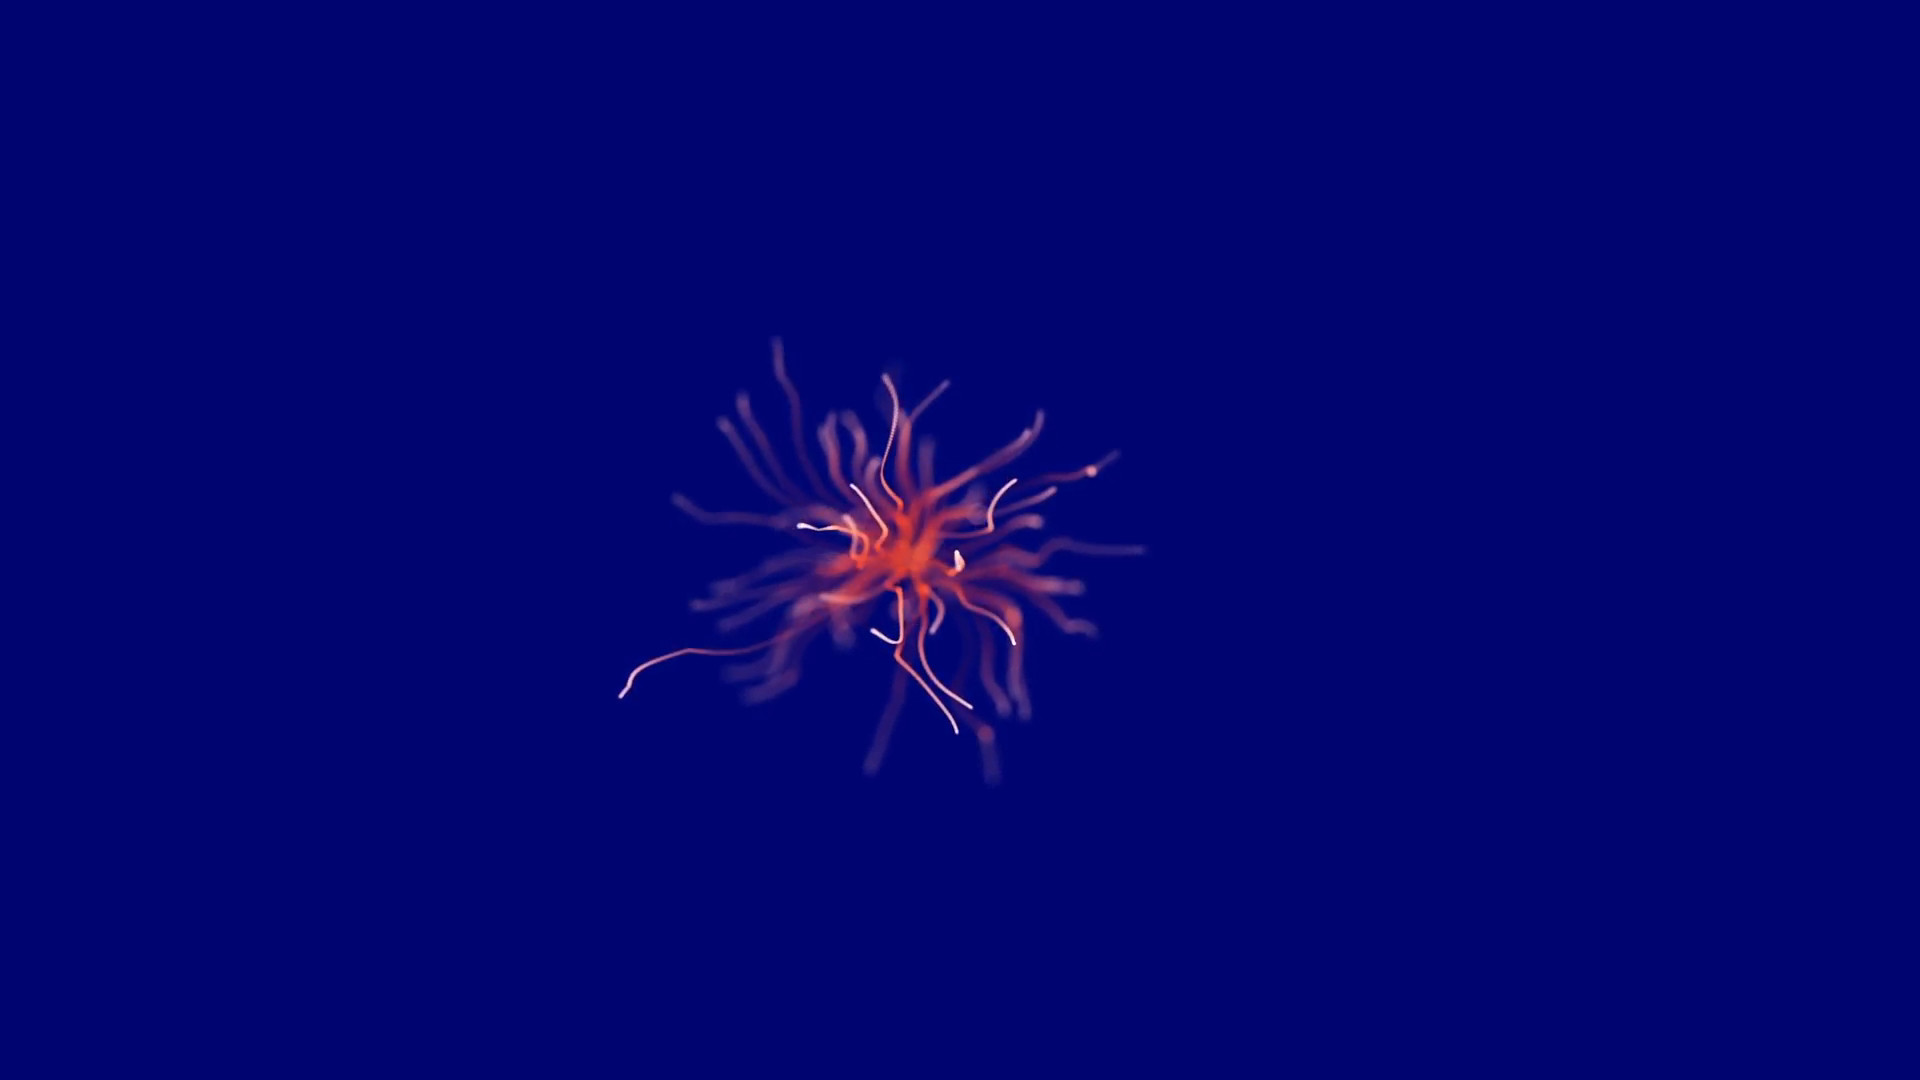 1920x1080 Weird Looking Floating Sea Creature on a Blue Screen Background Motion  Background - Storyblocks Video